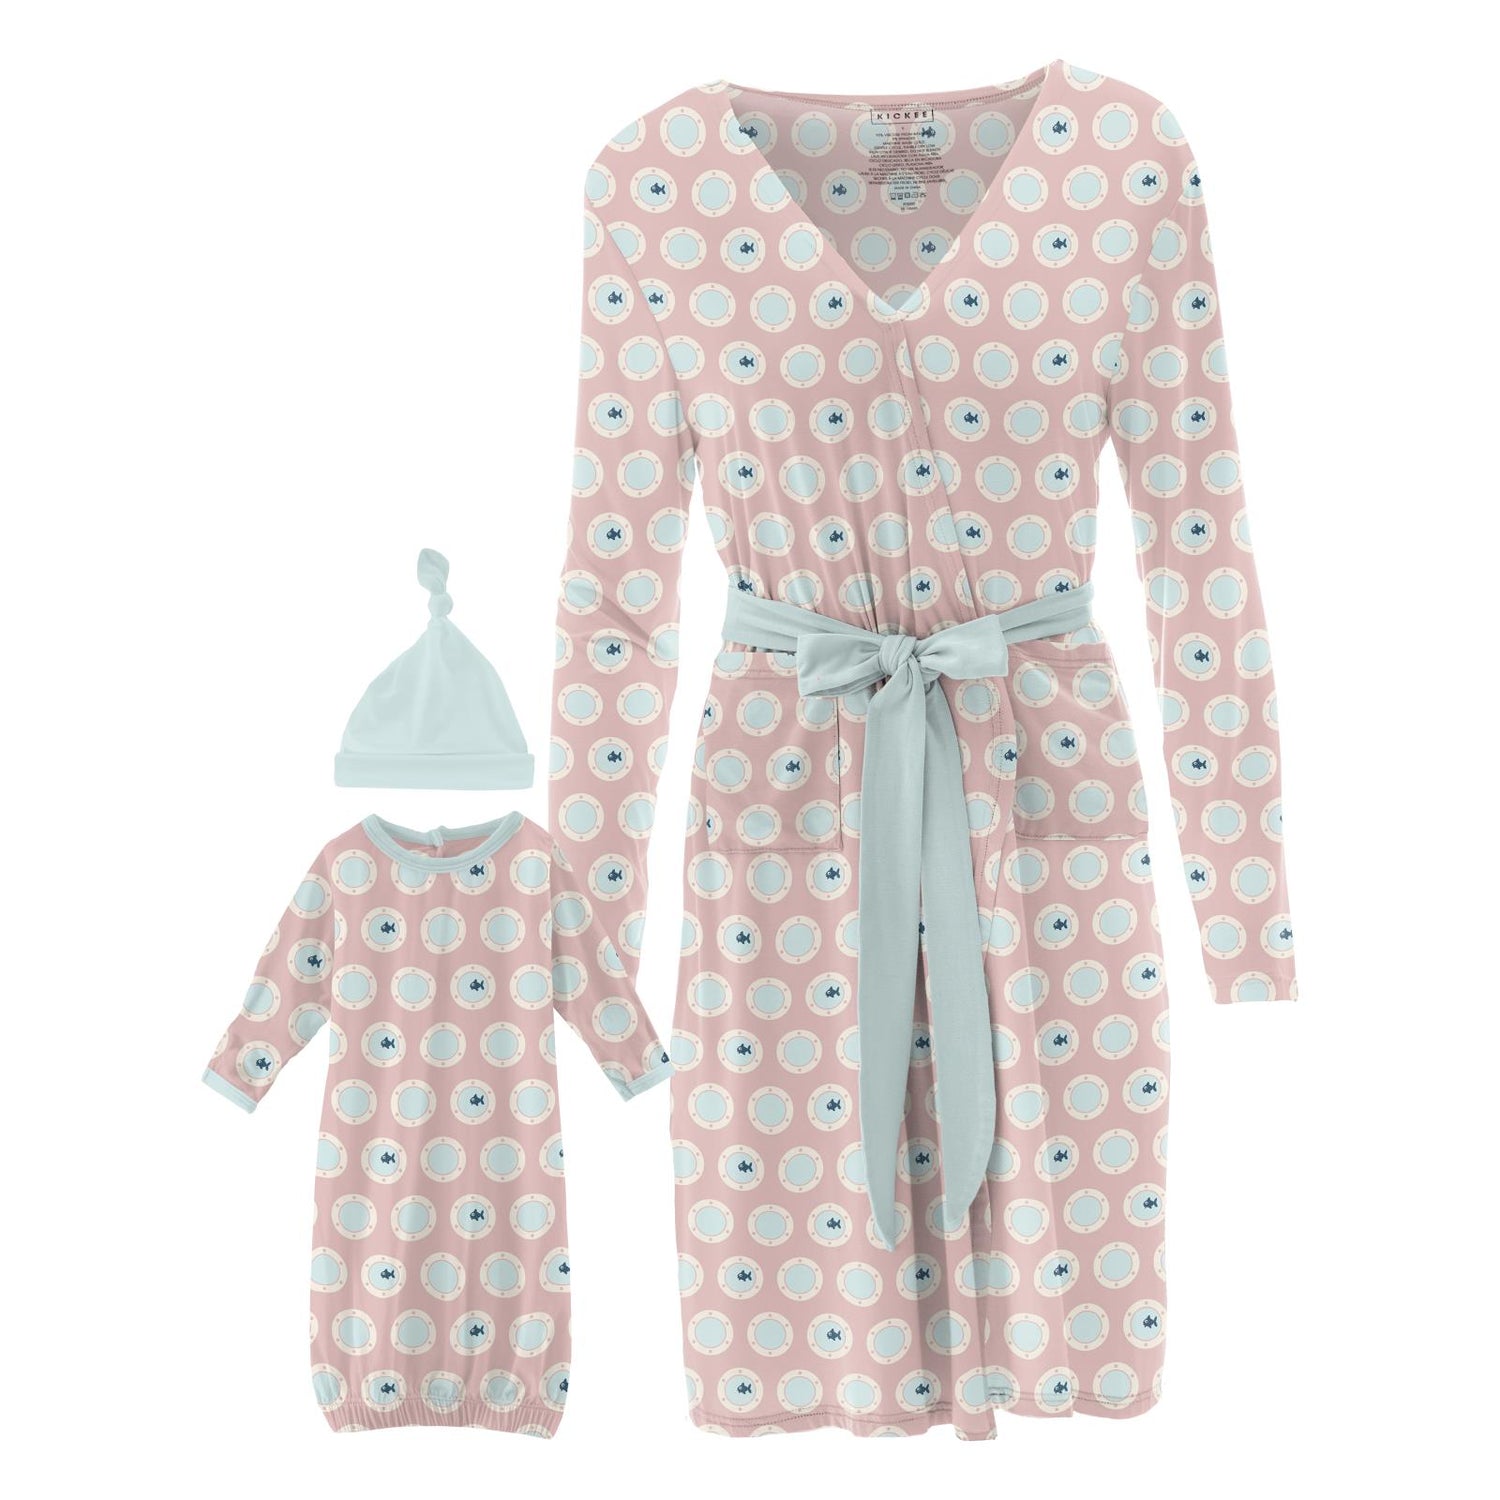 Women's Maternity/Nursing Robe & Layette Gown Set in Baby Rose Porthole